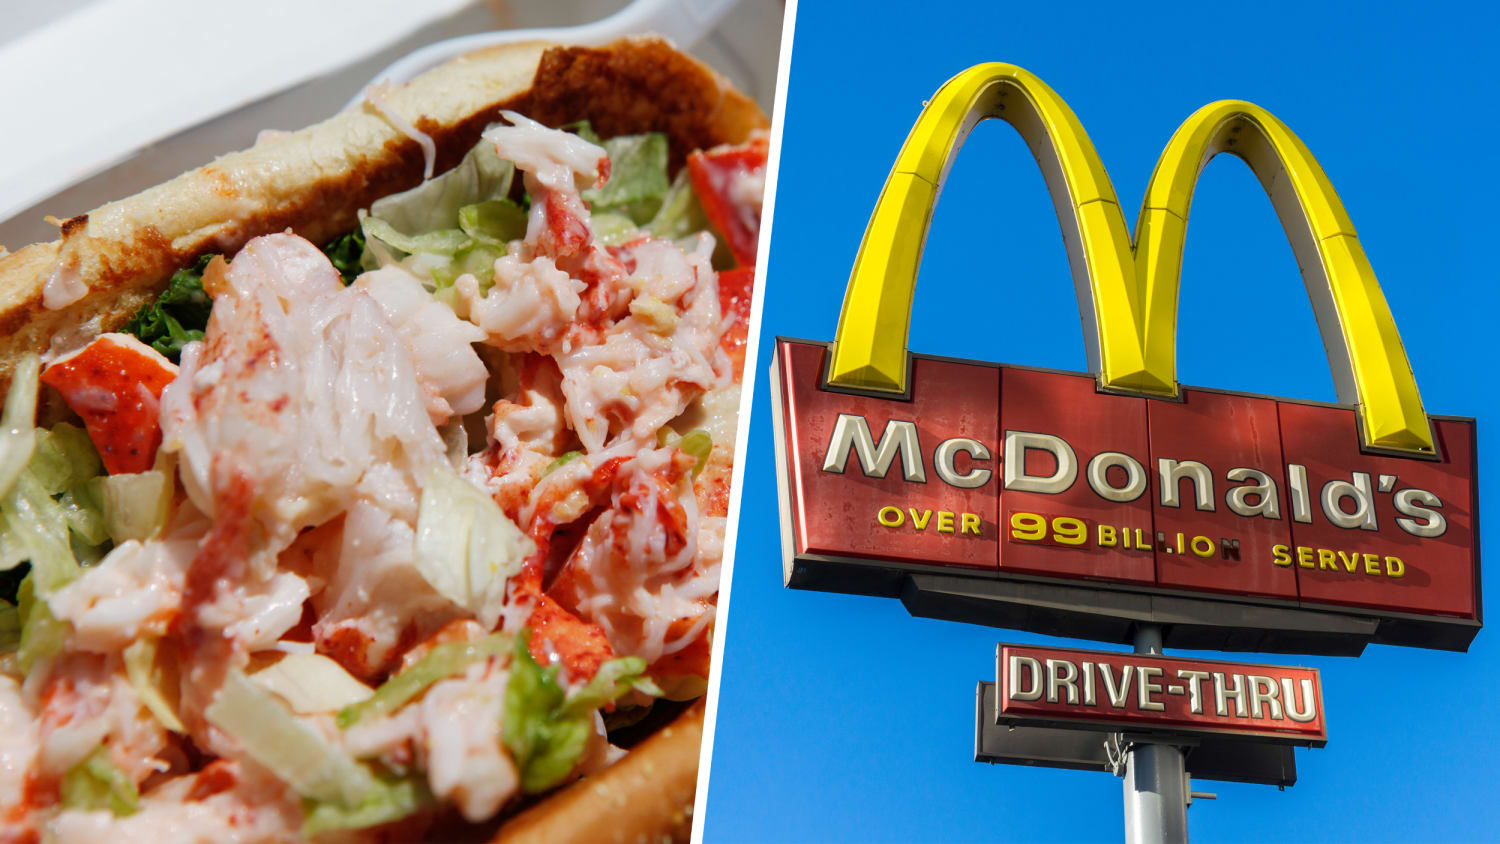 McDonald's McLobster Roll is coming back this summer